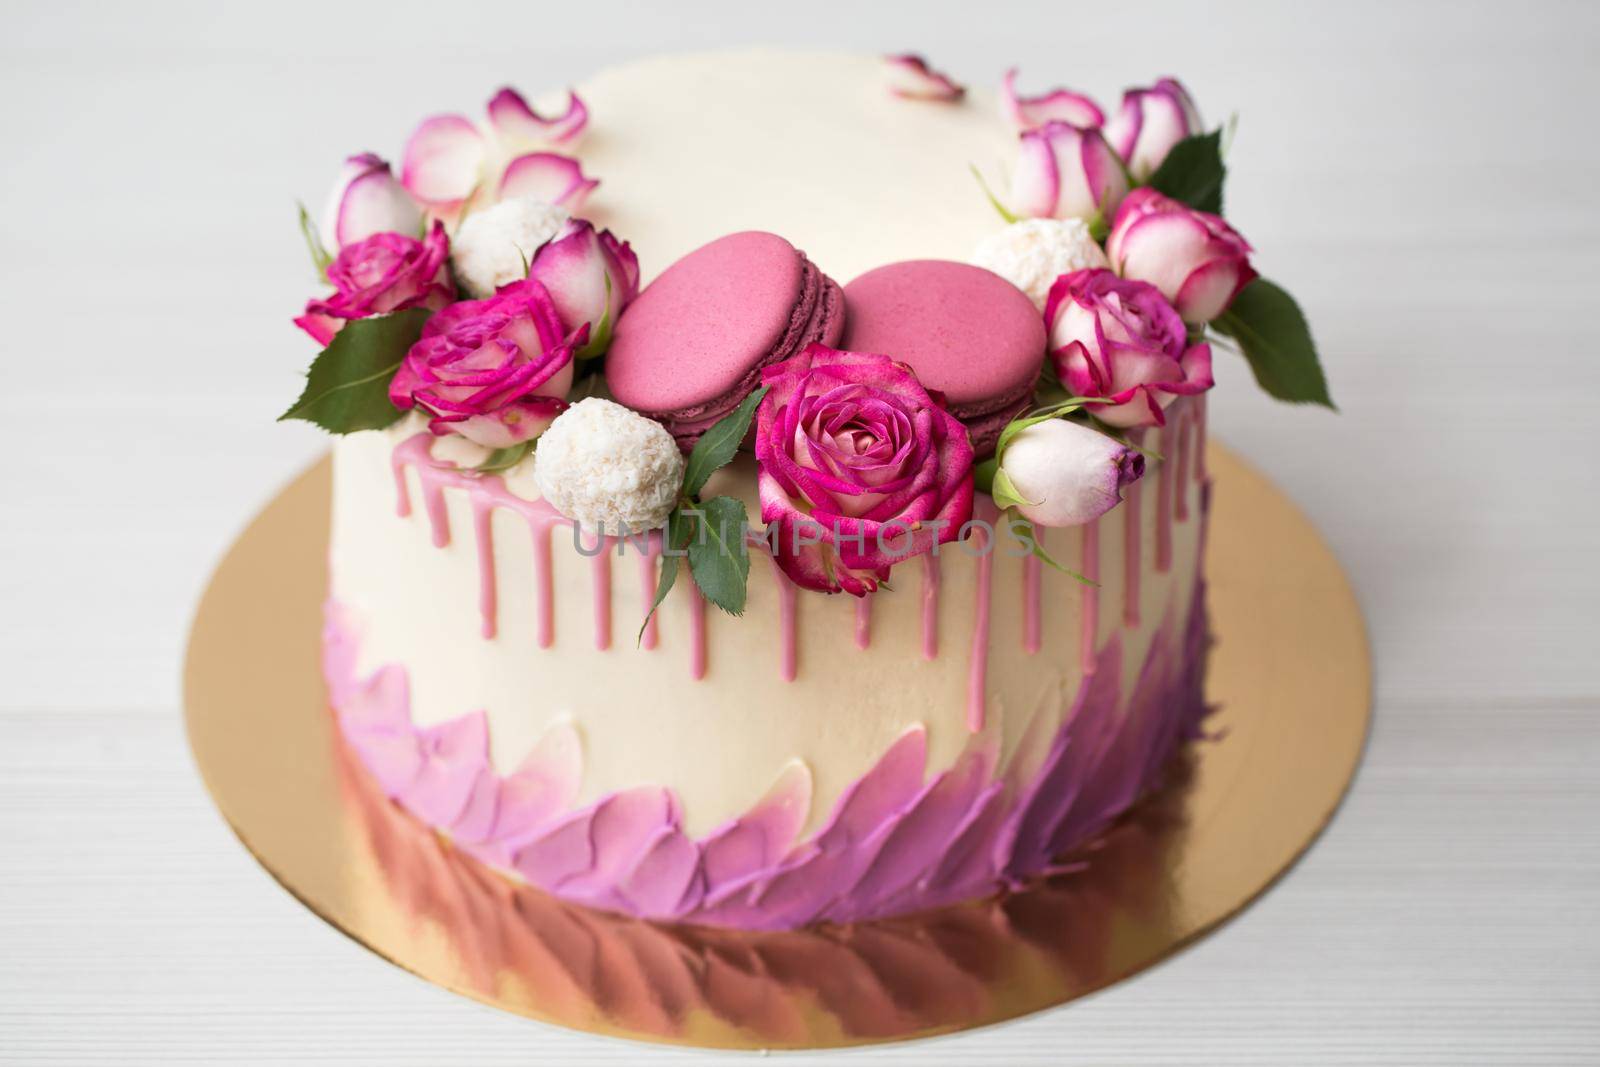 Cake with roses, sweets and lilac macaroons by StudioPeace